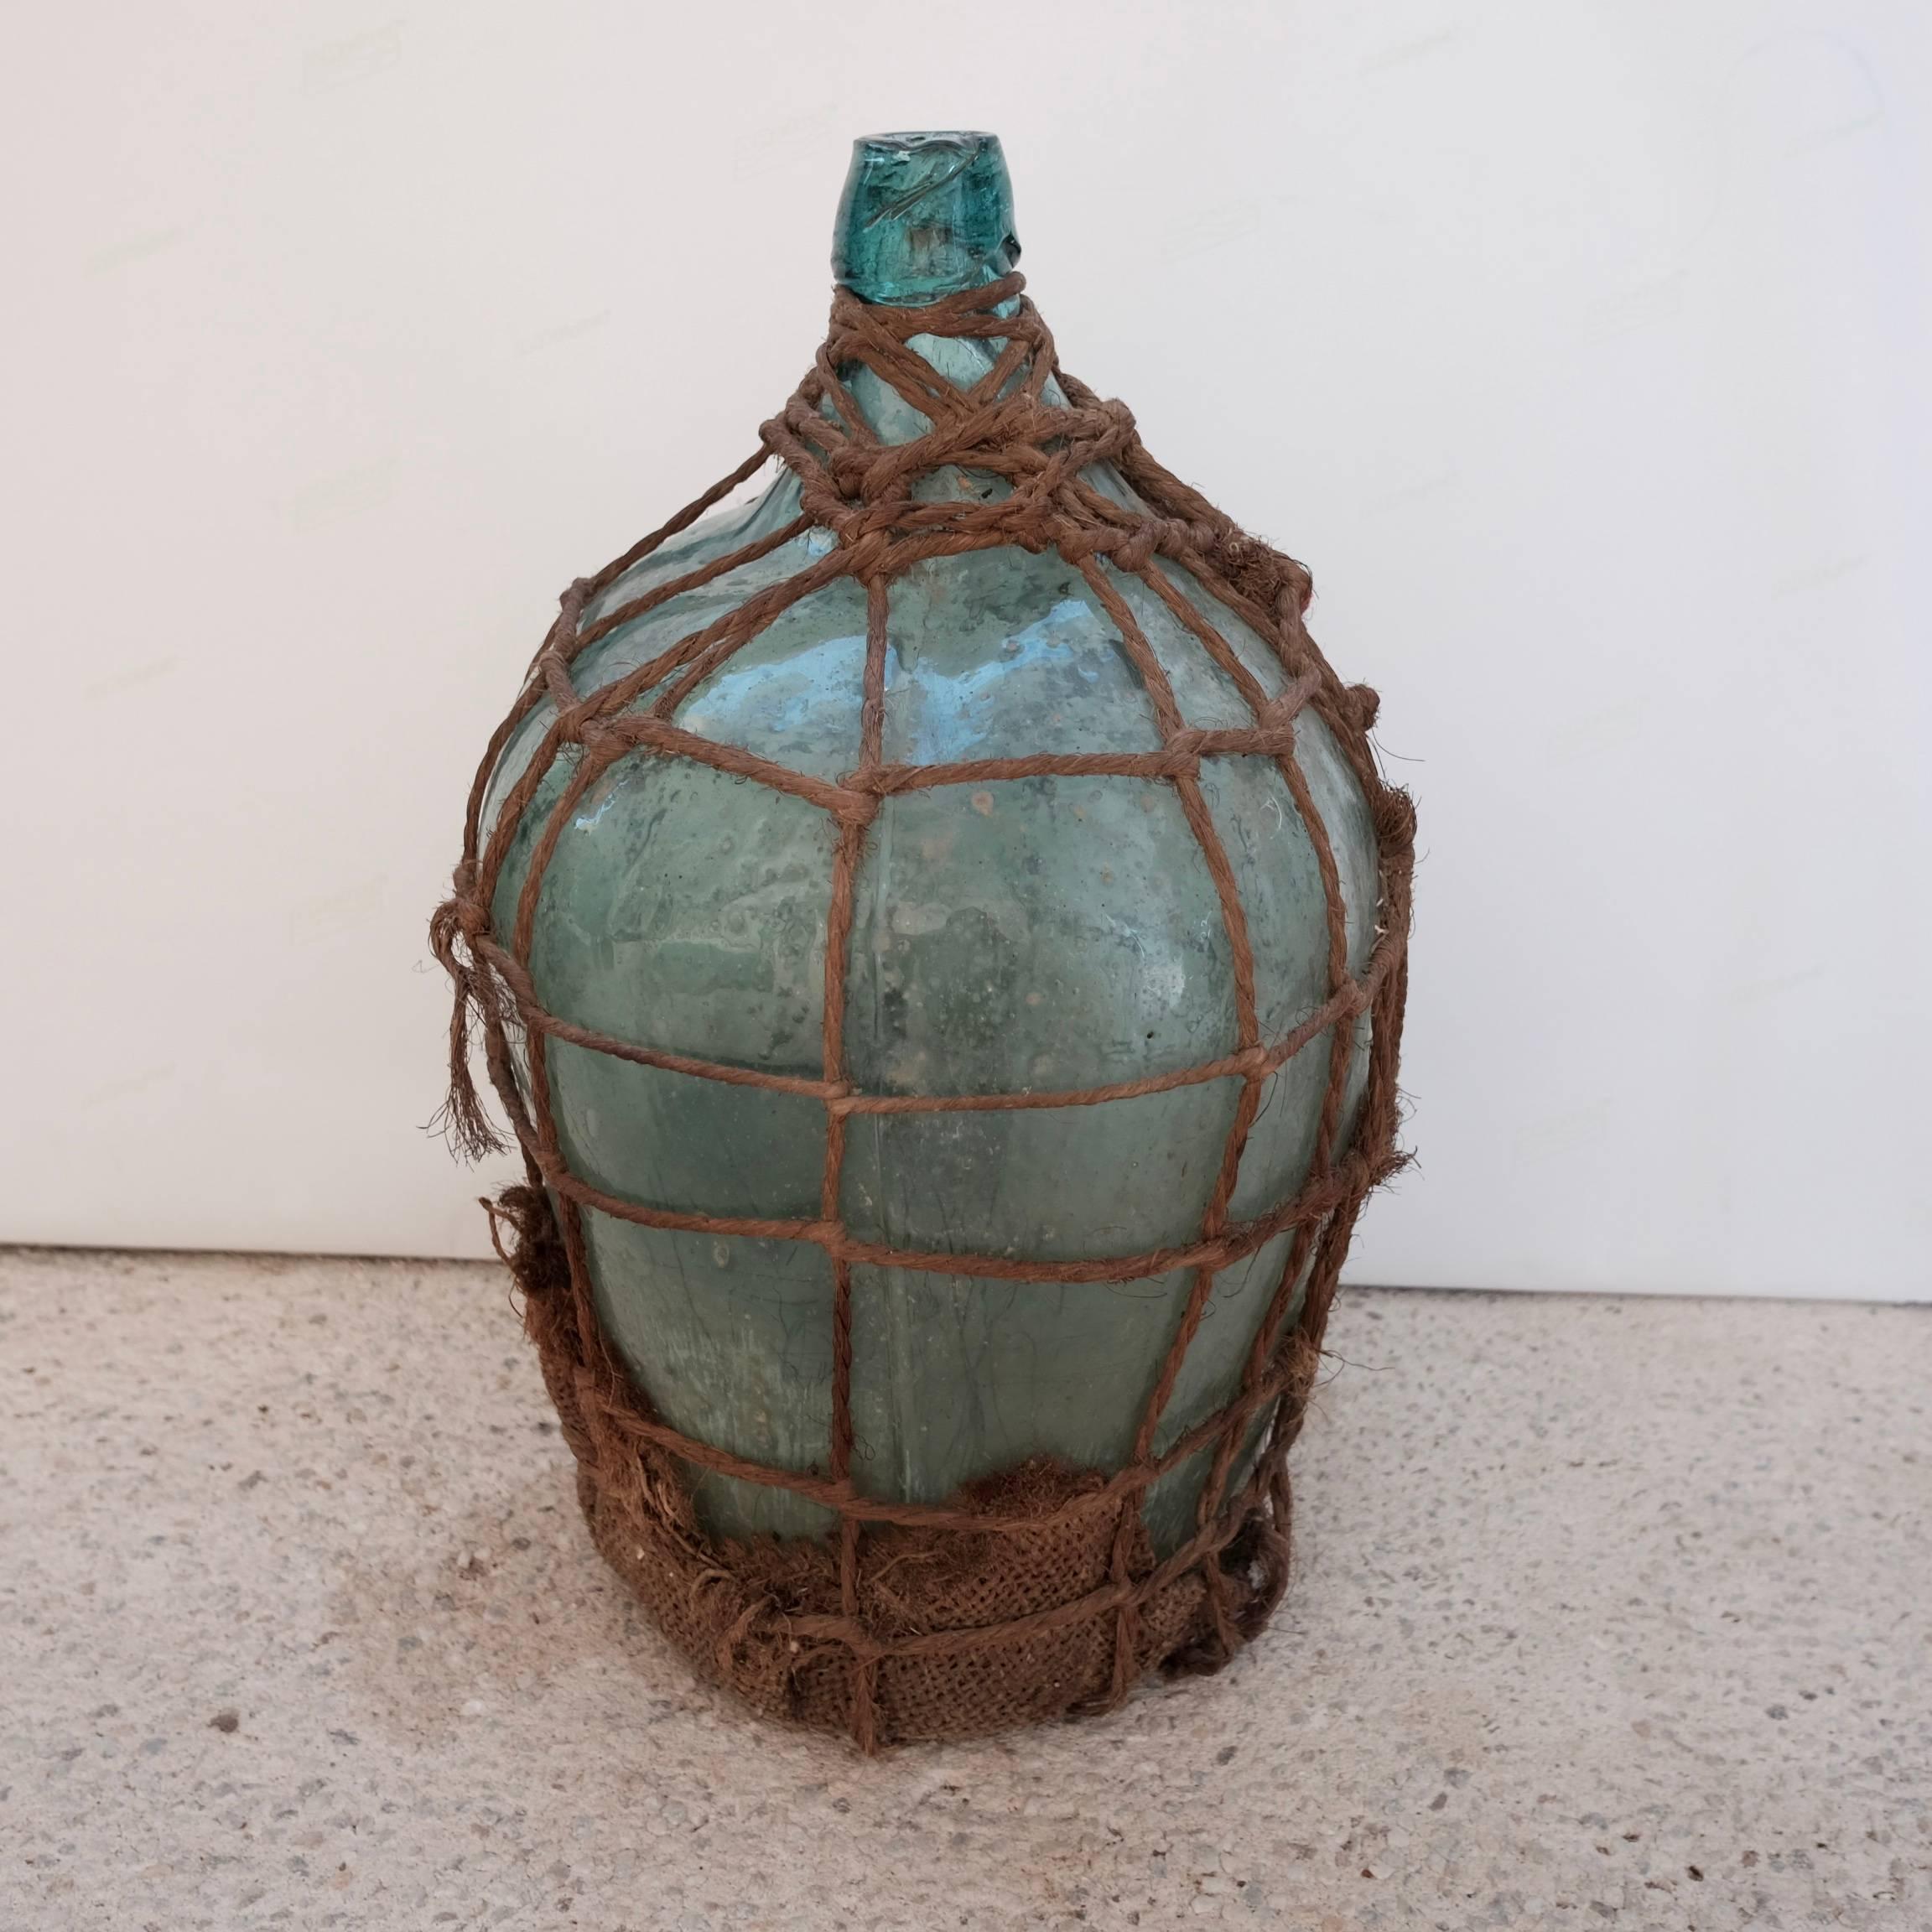 This vintage, rustic bottle comes with a unique wrap woven using ixtle rope (agave fiber). Color of glass is a medium toned blue or green. The spout is rustic and completely irregular. A slight bit of dirt remains intact throughout the jug which can